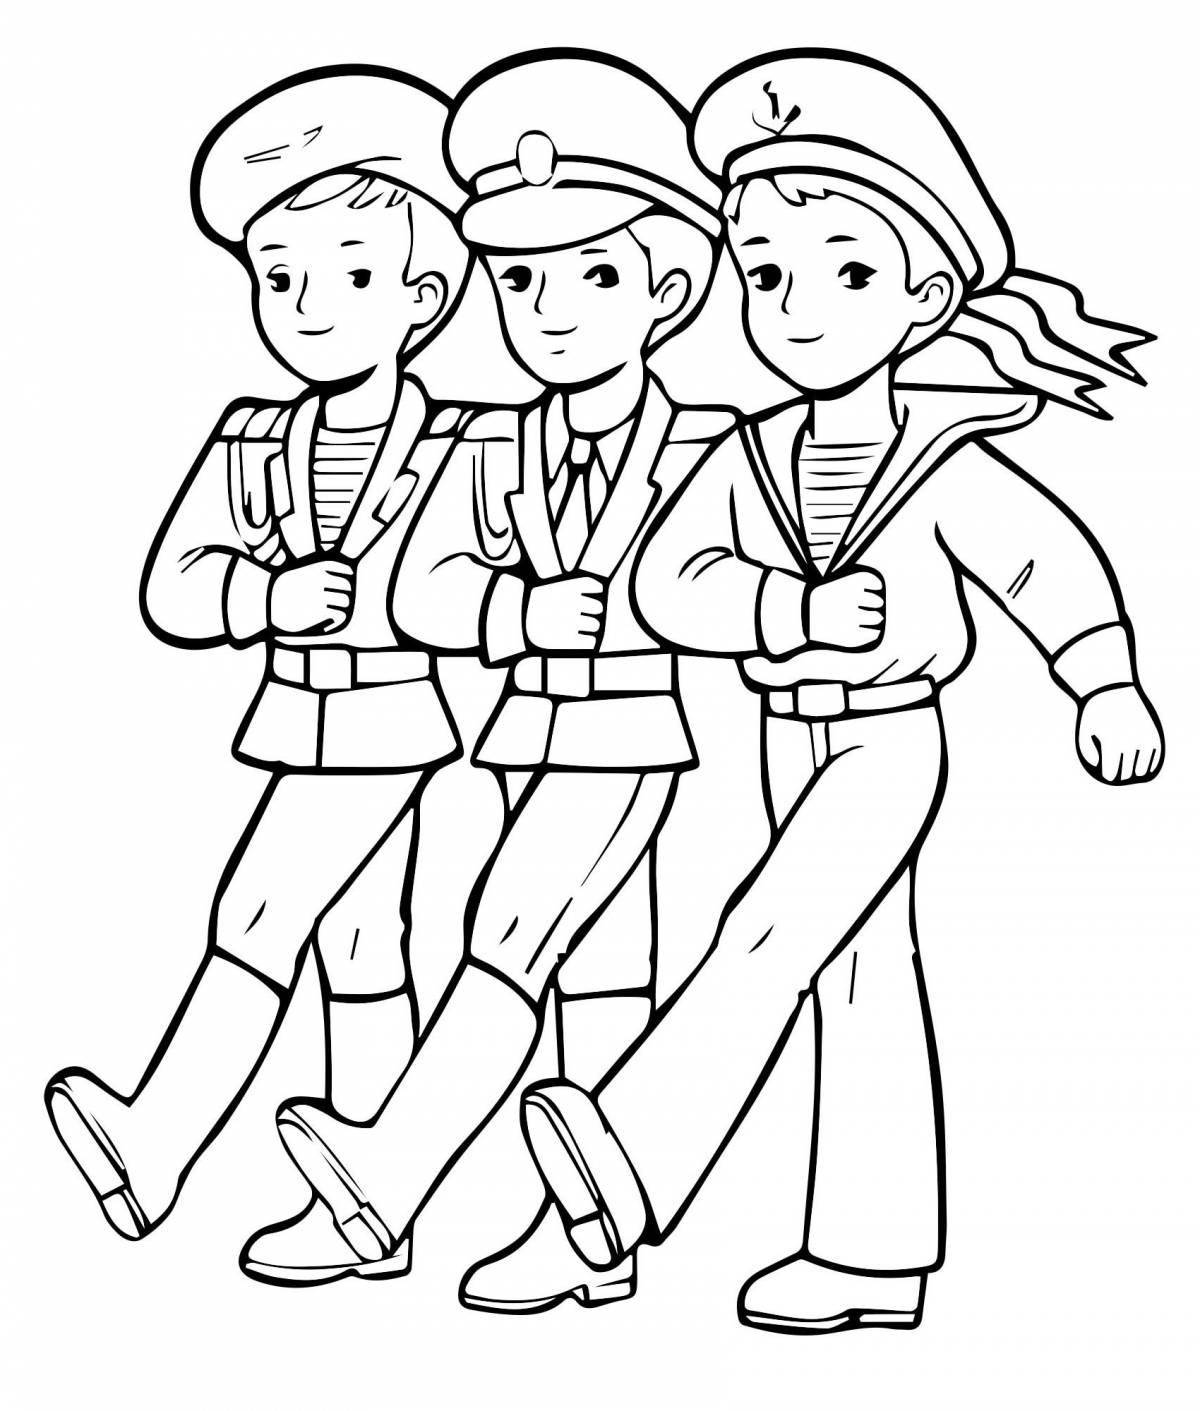 Coloring page calm soldier page February 23